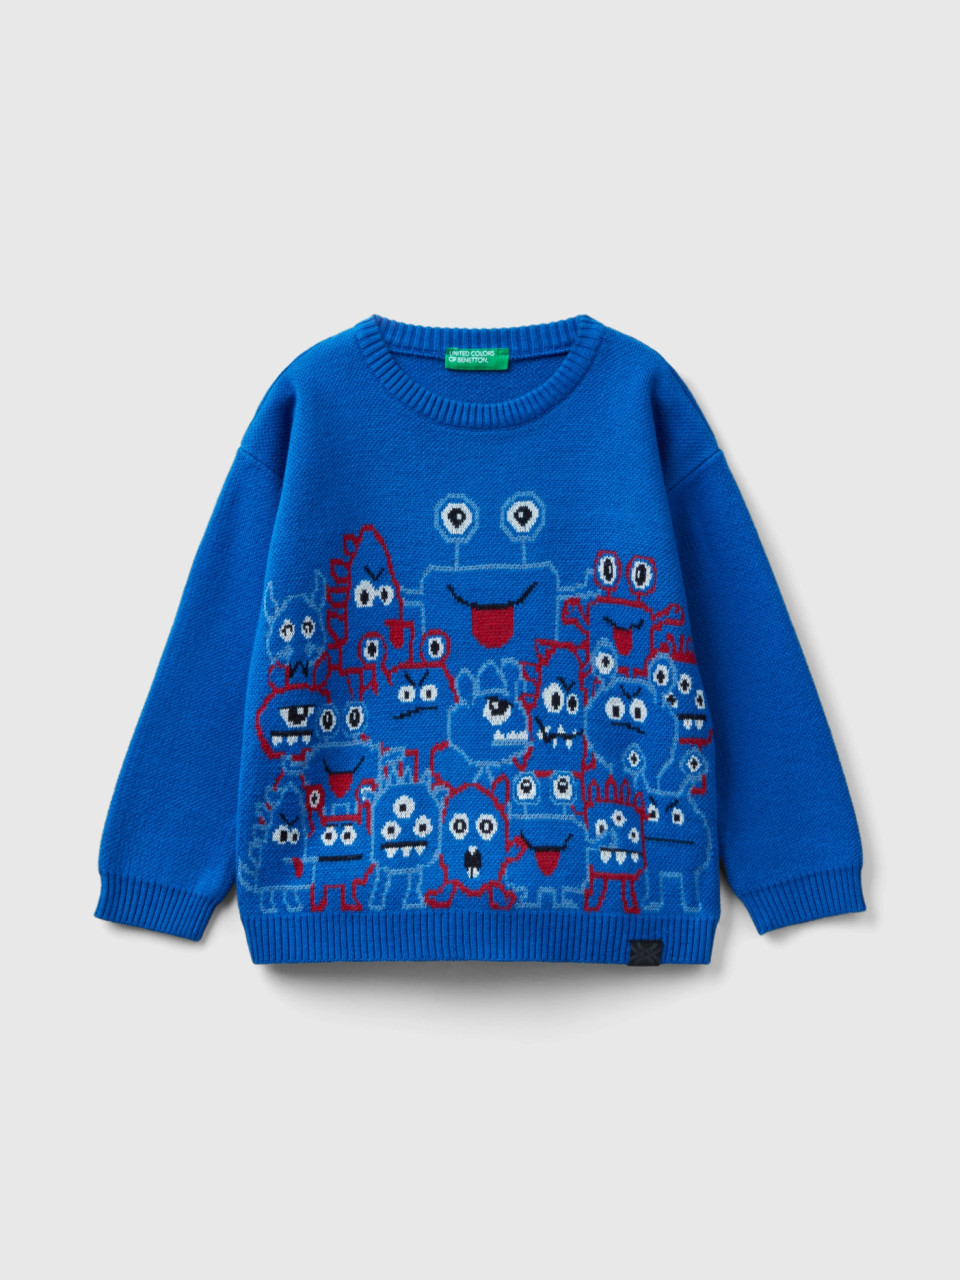 Benetton, Sweater With Monster Graphics, Bright Blue, Kids